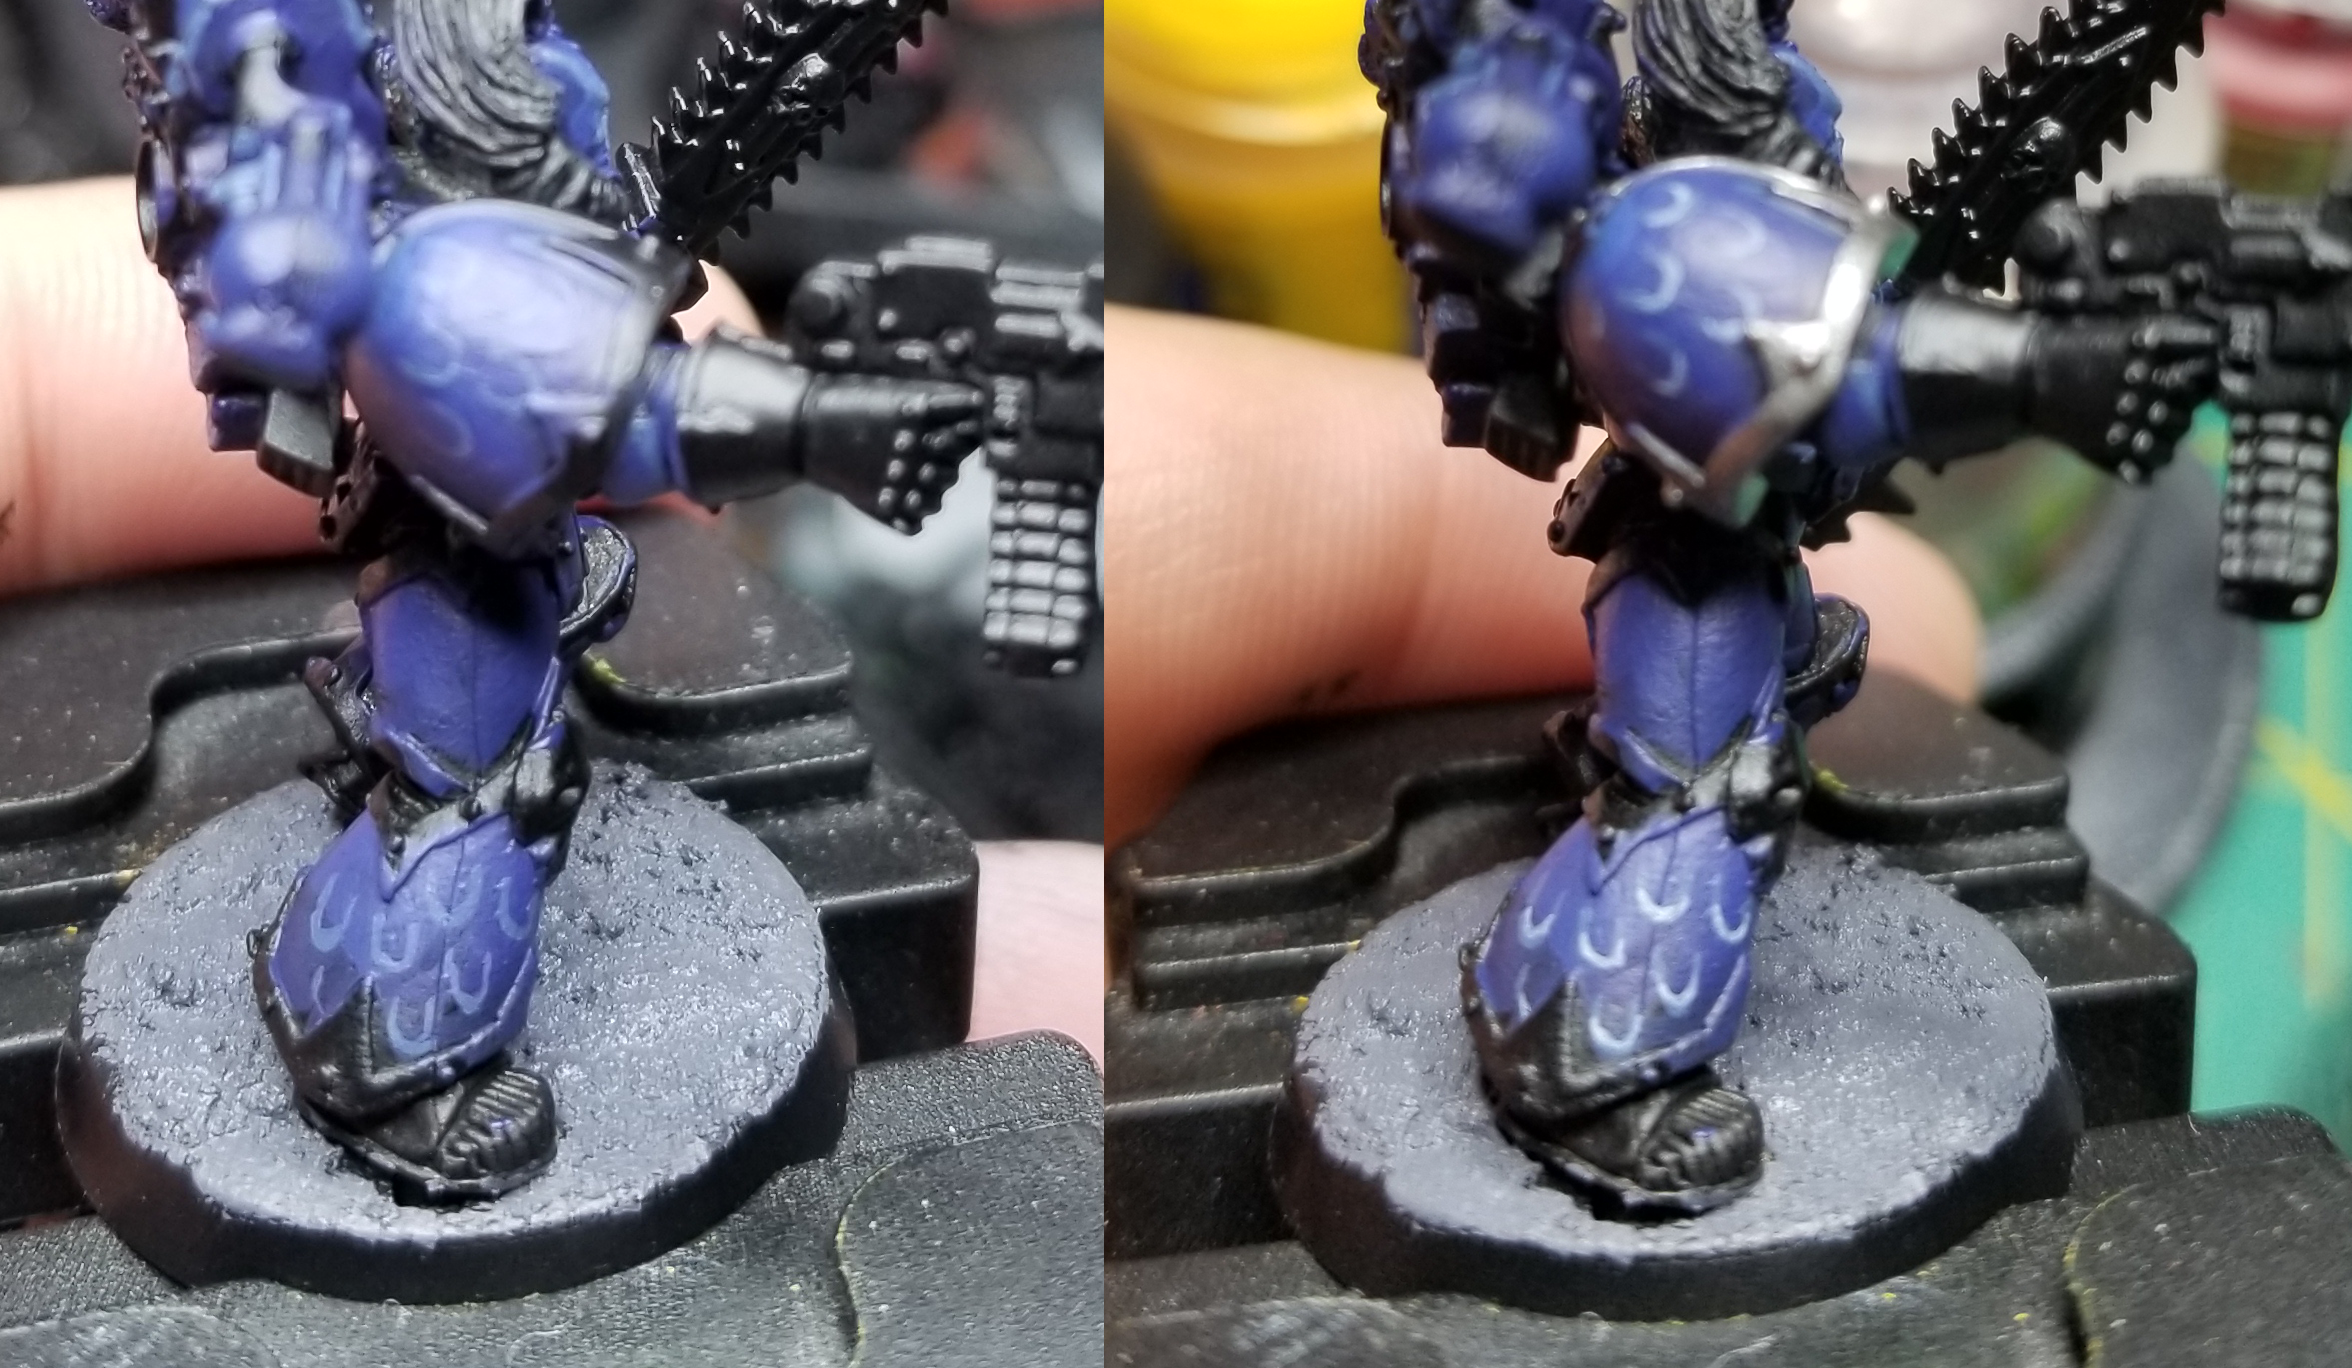 How To Paint Everything 2nd Edition Chaos Space Marines Goonhammer